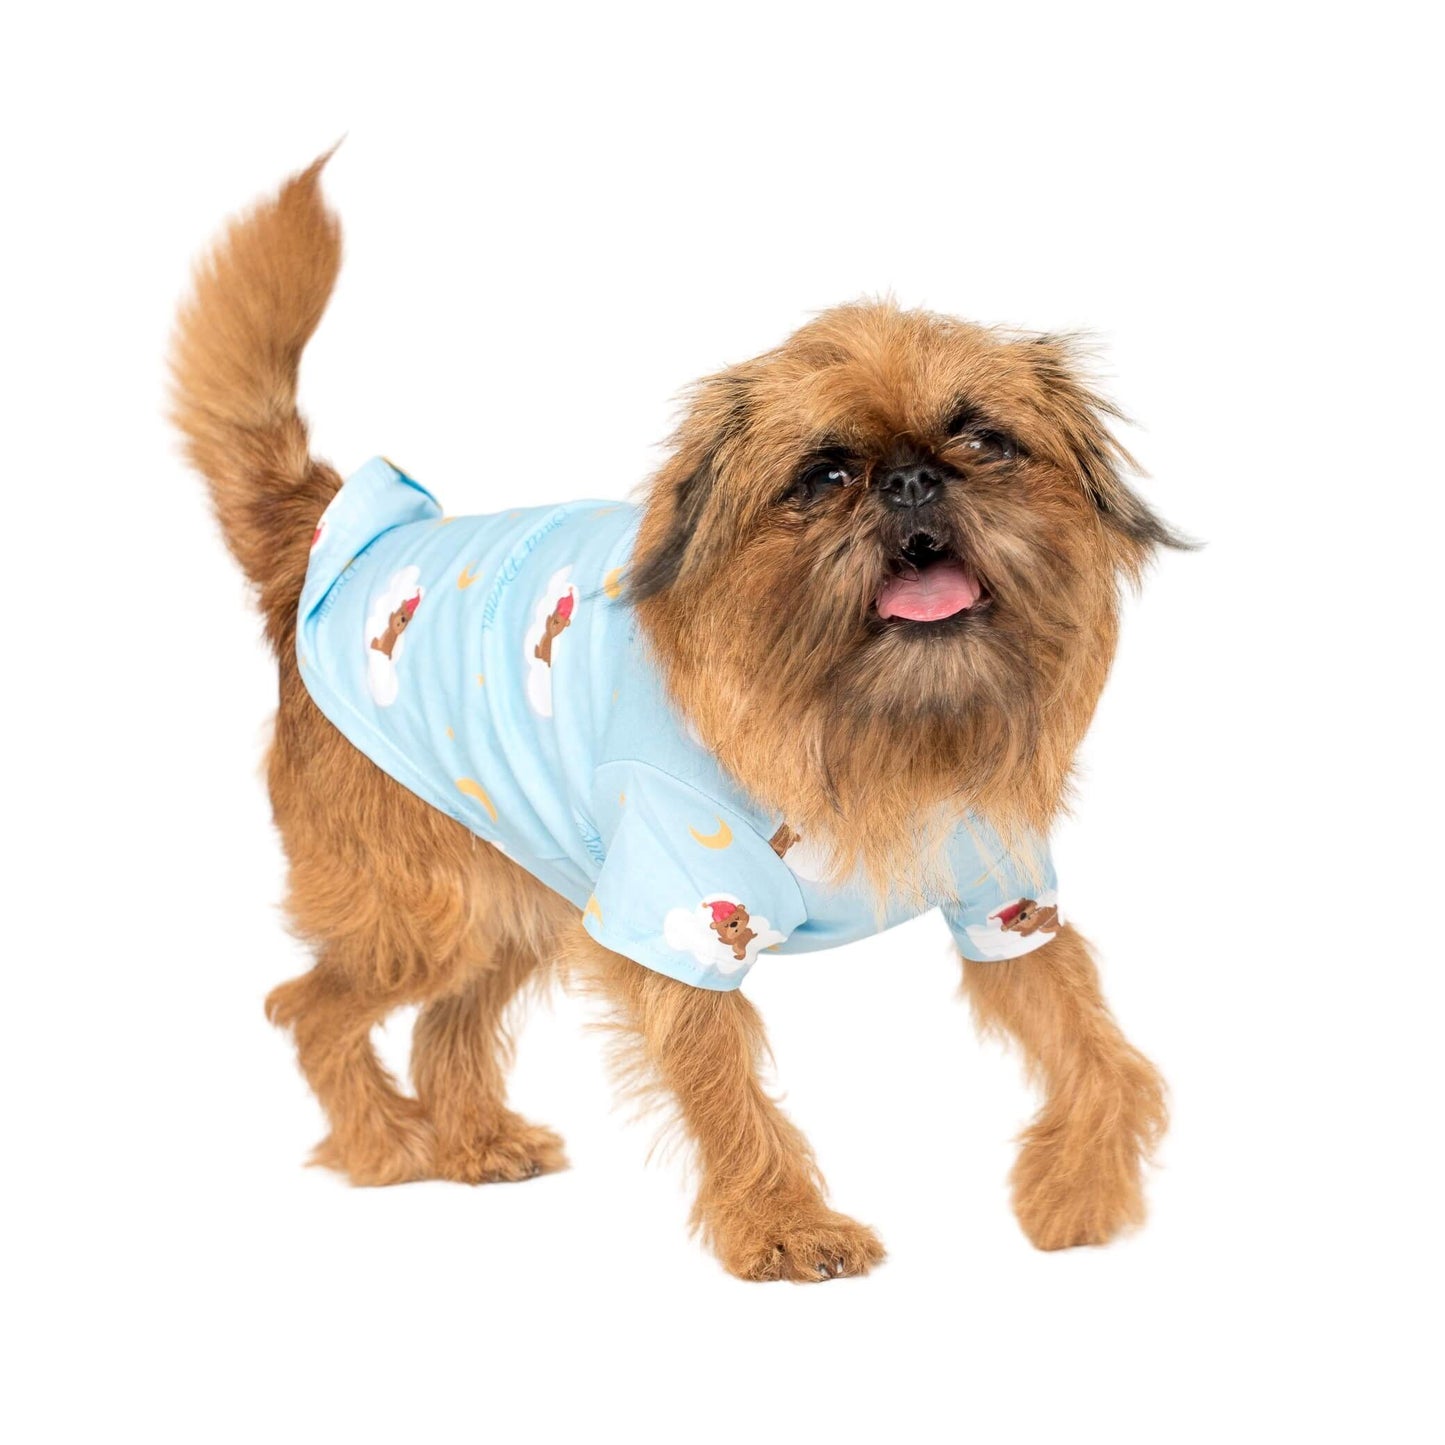 Gromit the Griffon standing front on wearing lil dreamer blue pyjamas for dogs.